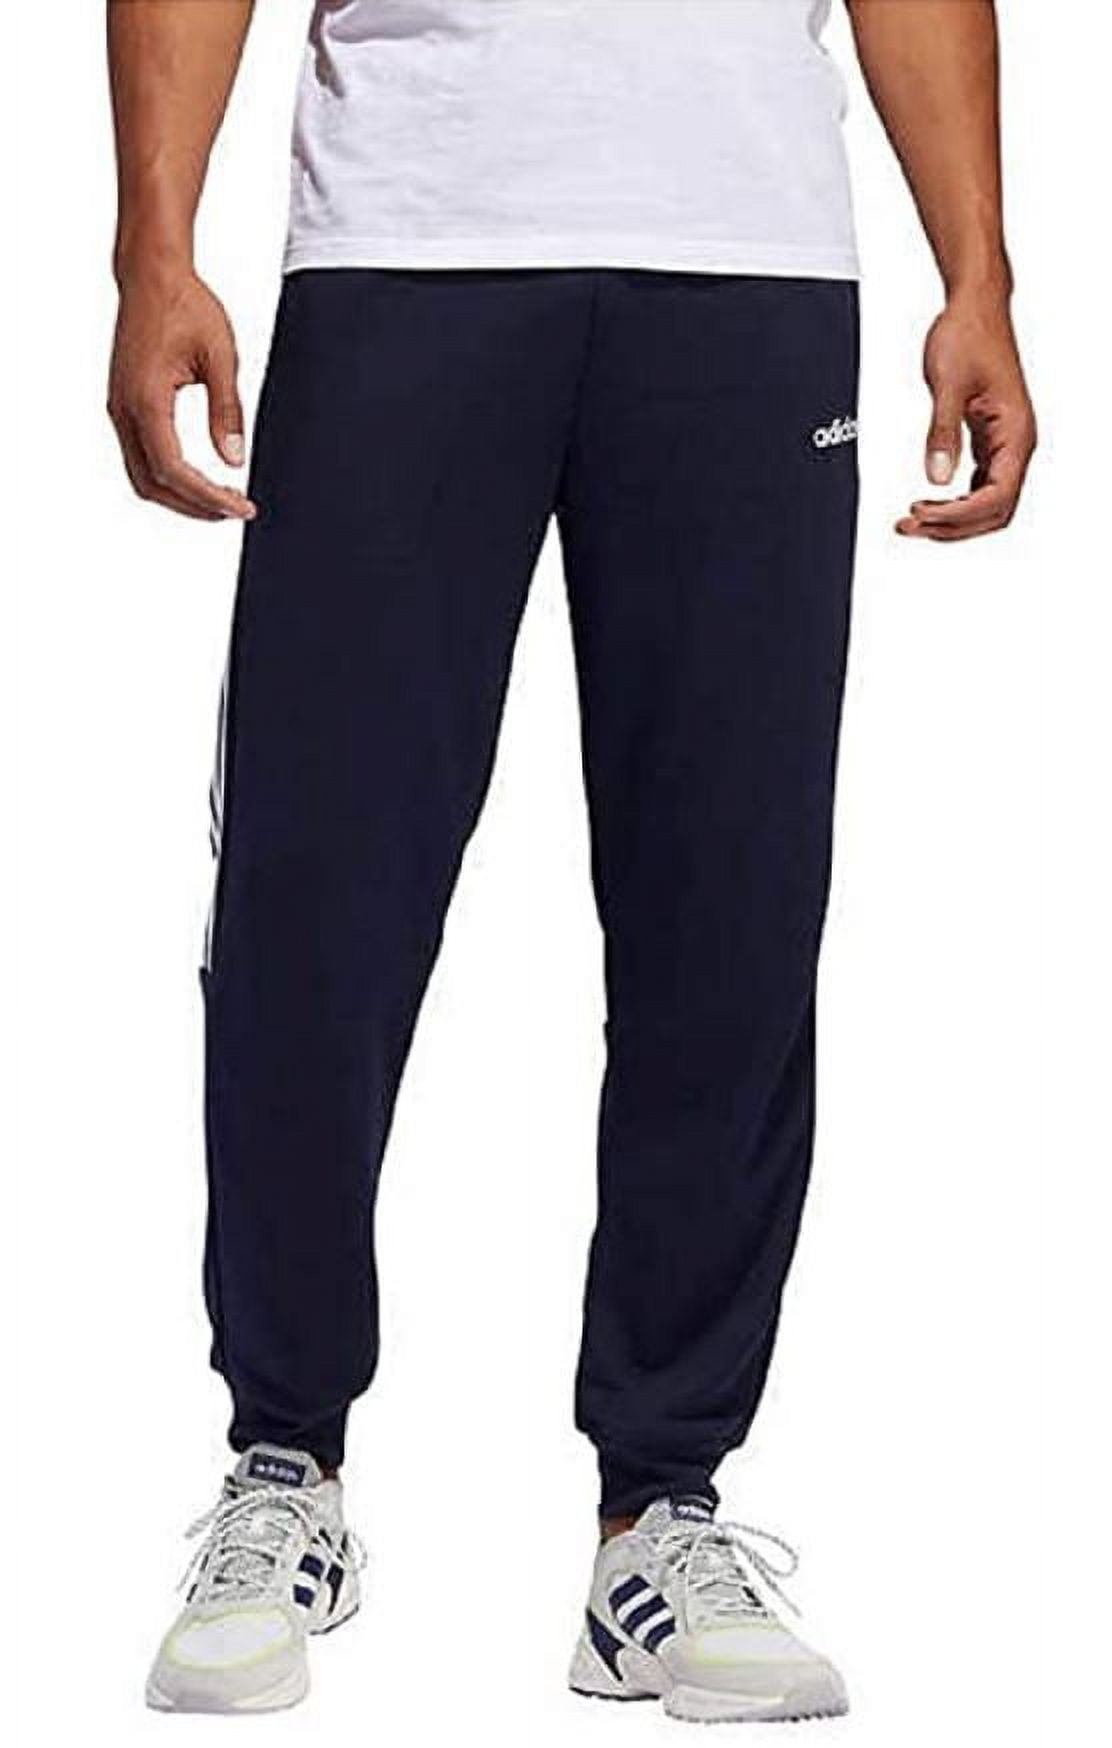 Adidas Men's Neo French Terry 3 Stripe Jogger Sweat Pants, Navy